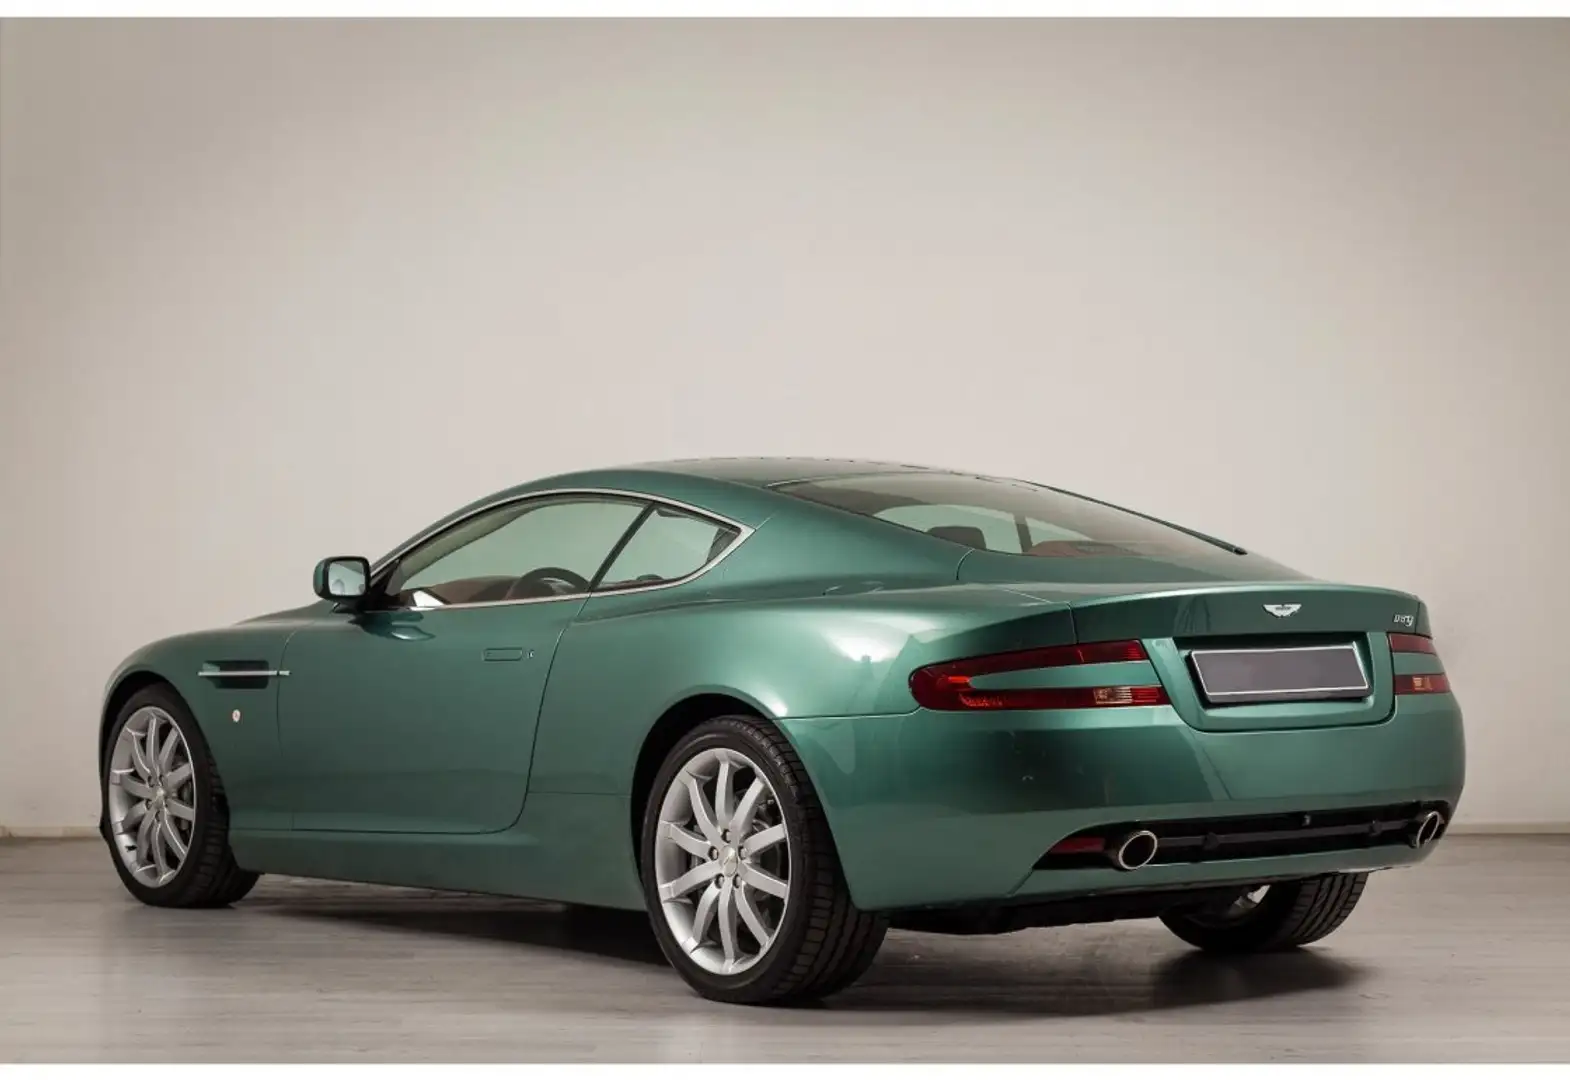 Aston Martin DB9 DB9 Coupe Touchtronic Groen - 2